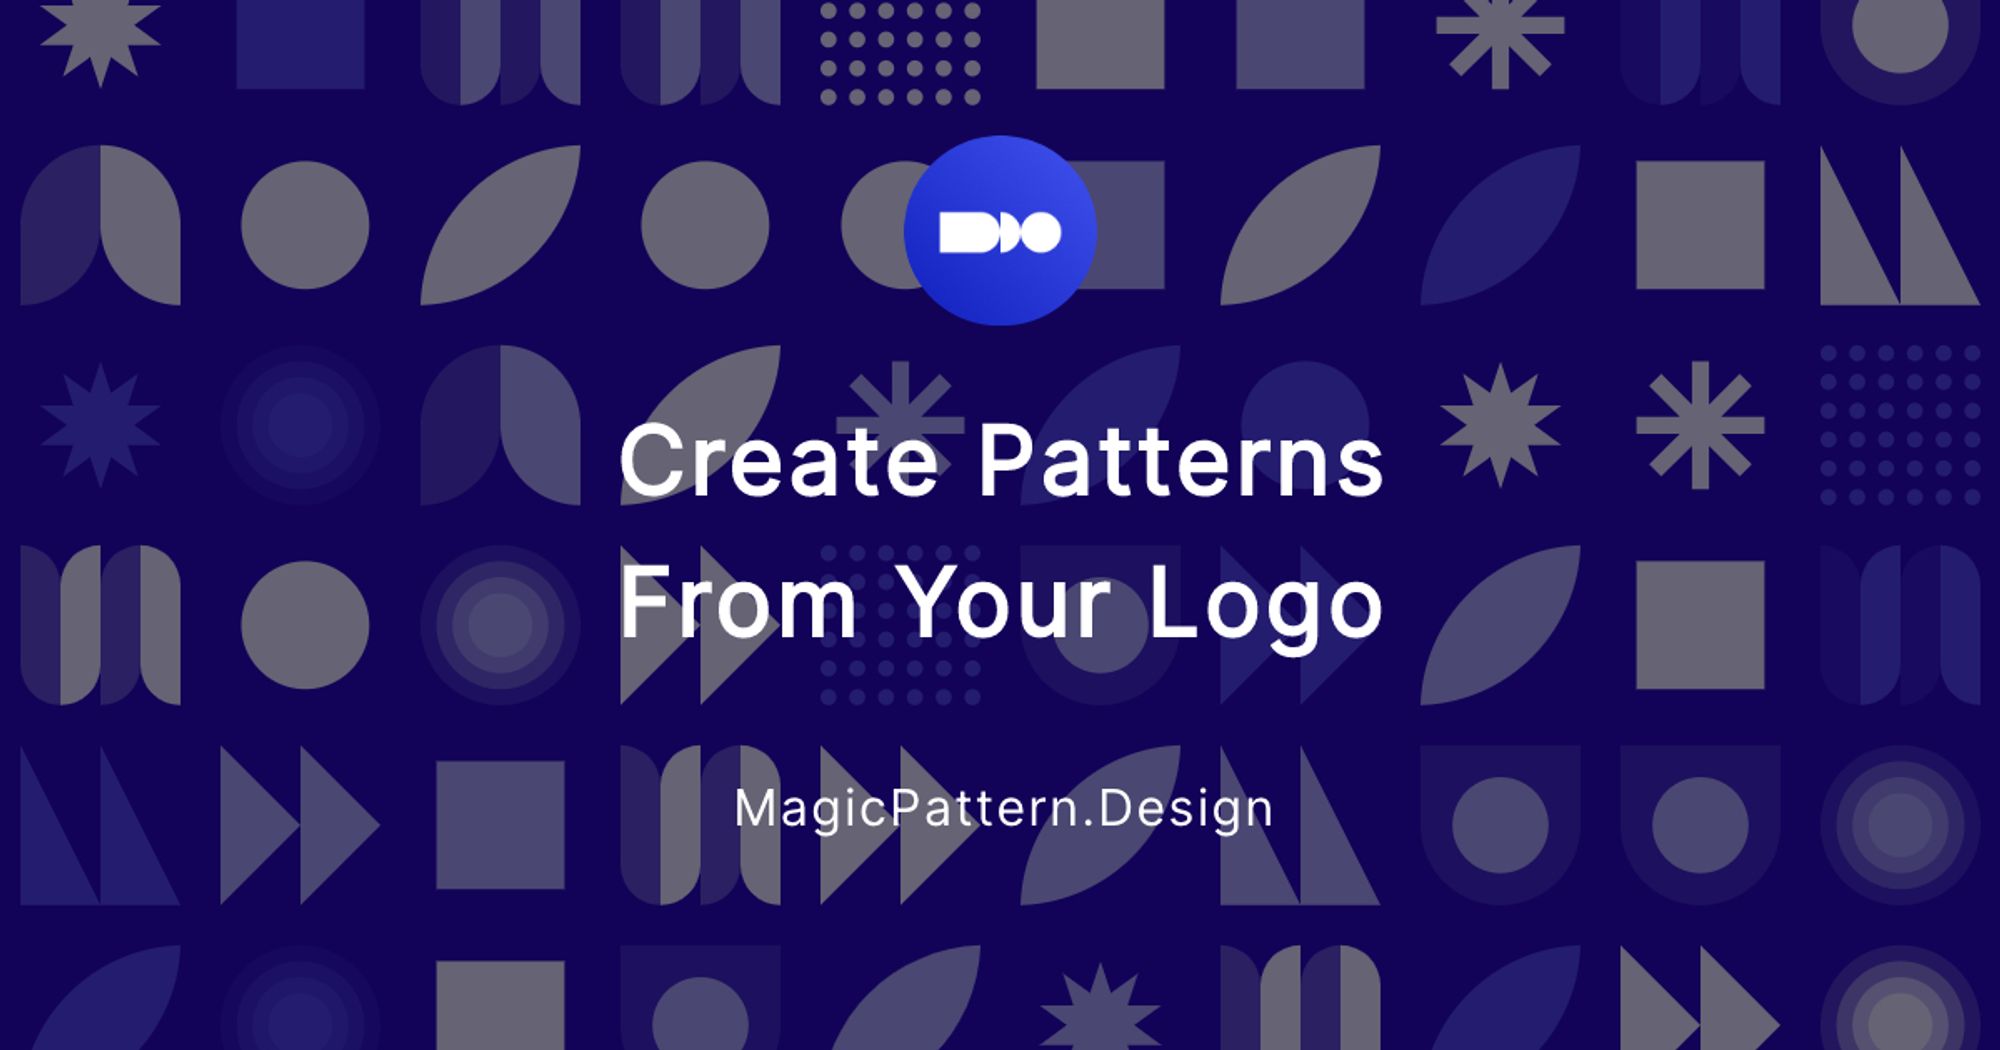 Create a pattern with your logo